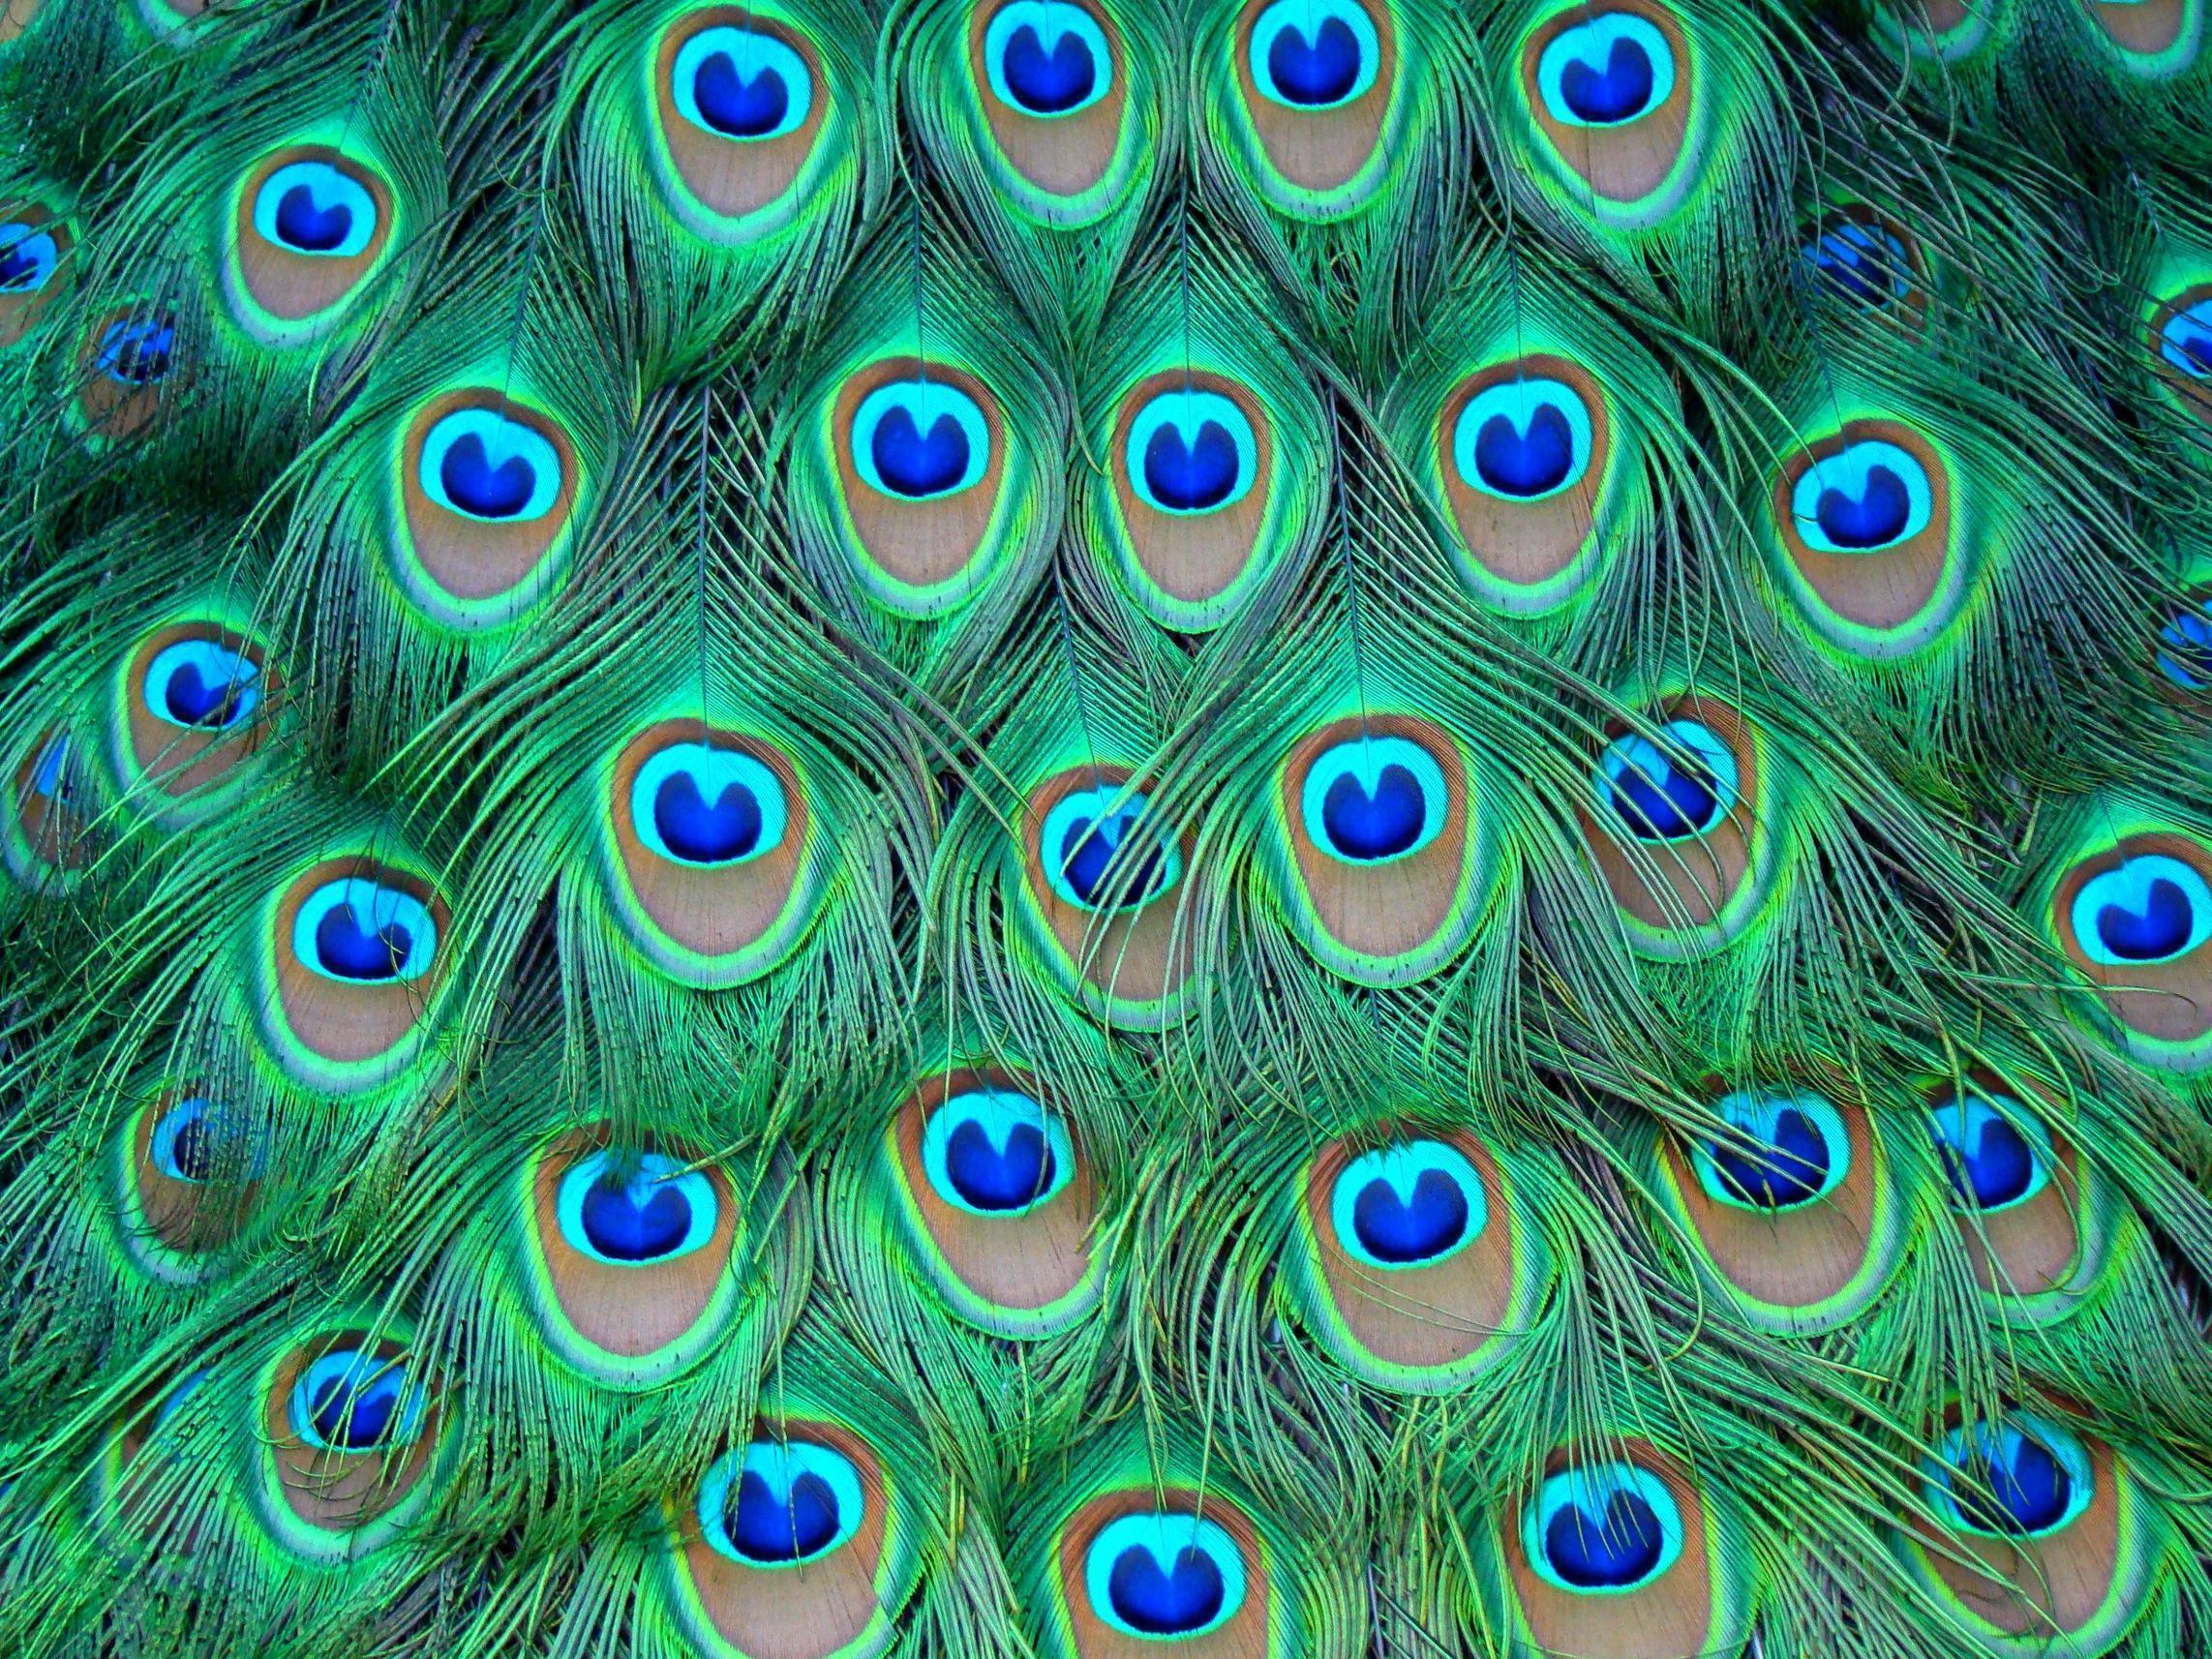 Picture Of Peacocks Feathers 55697 Wallpaper: 3264x2448